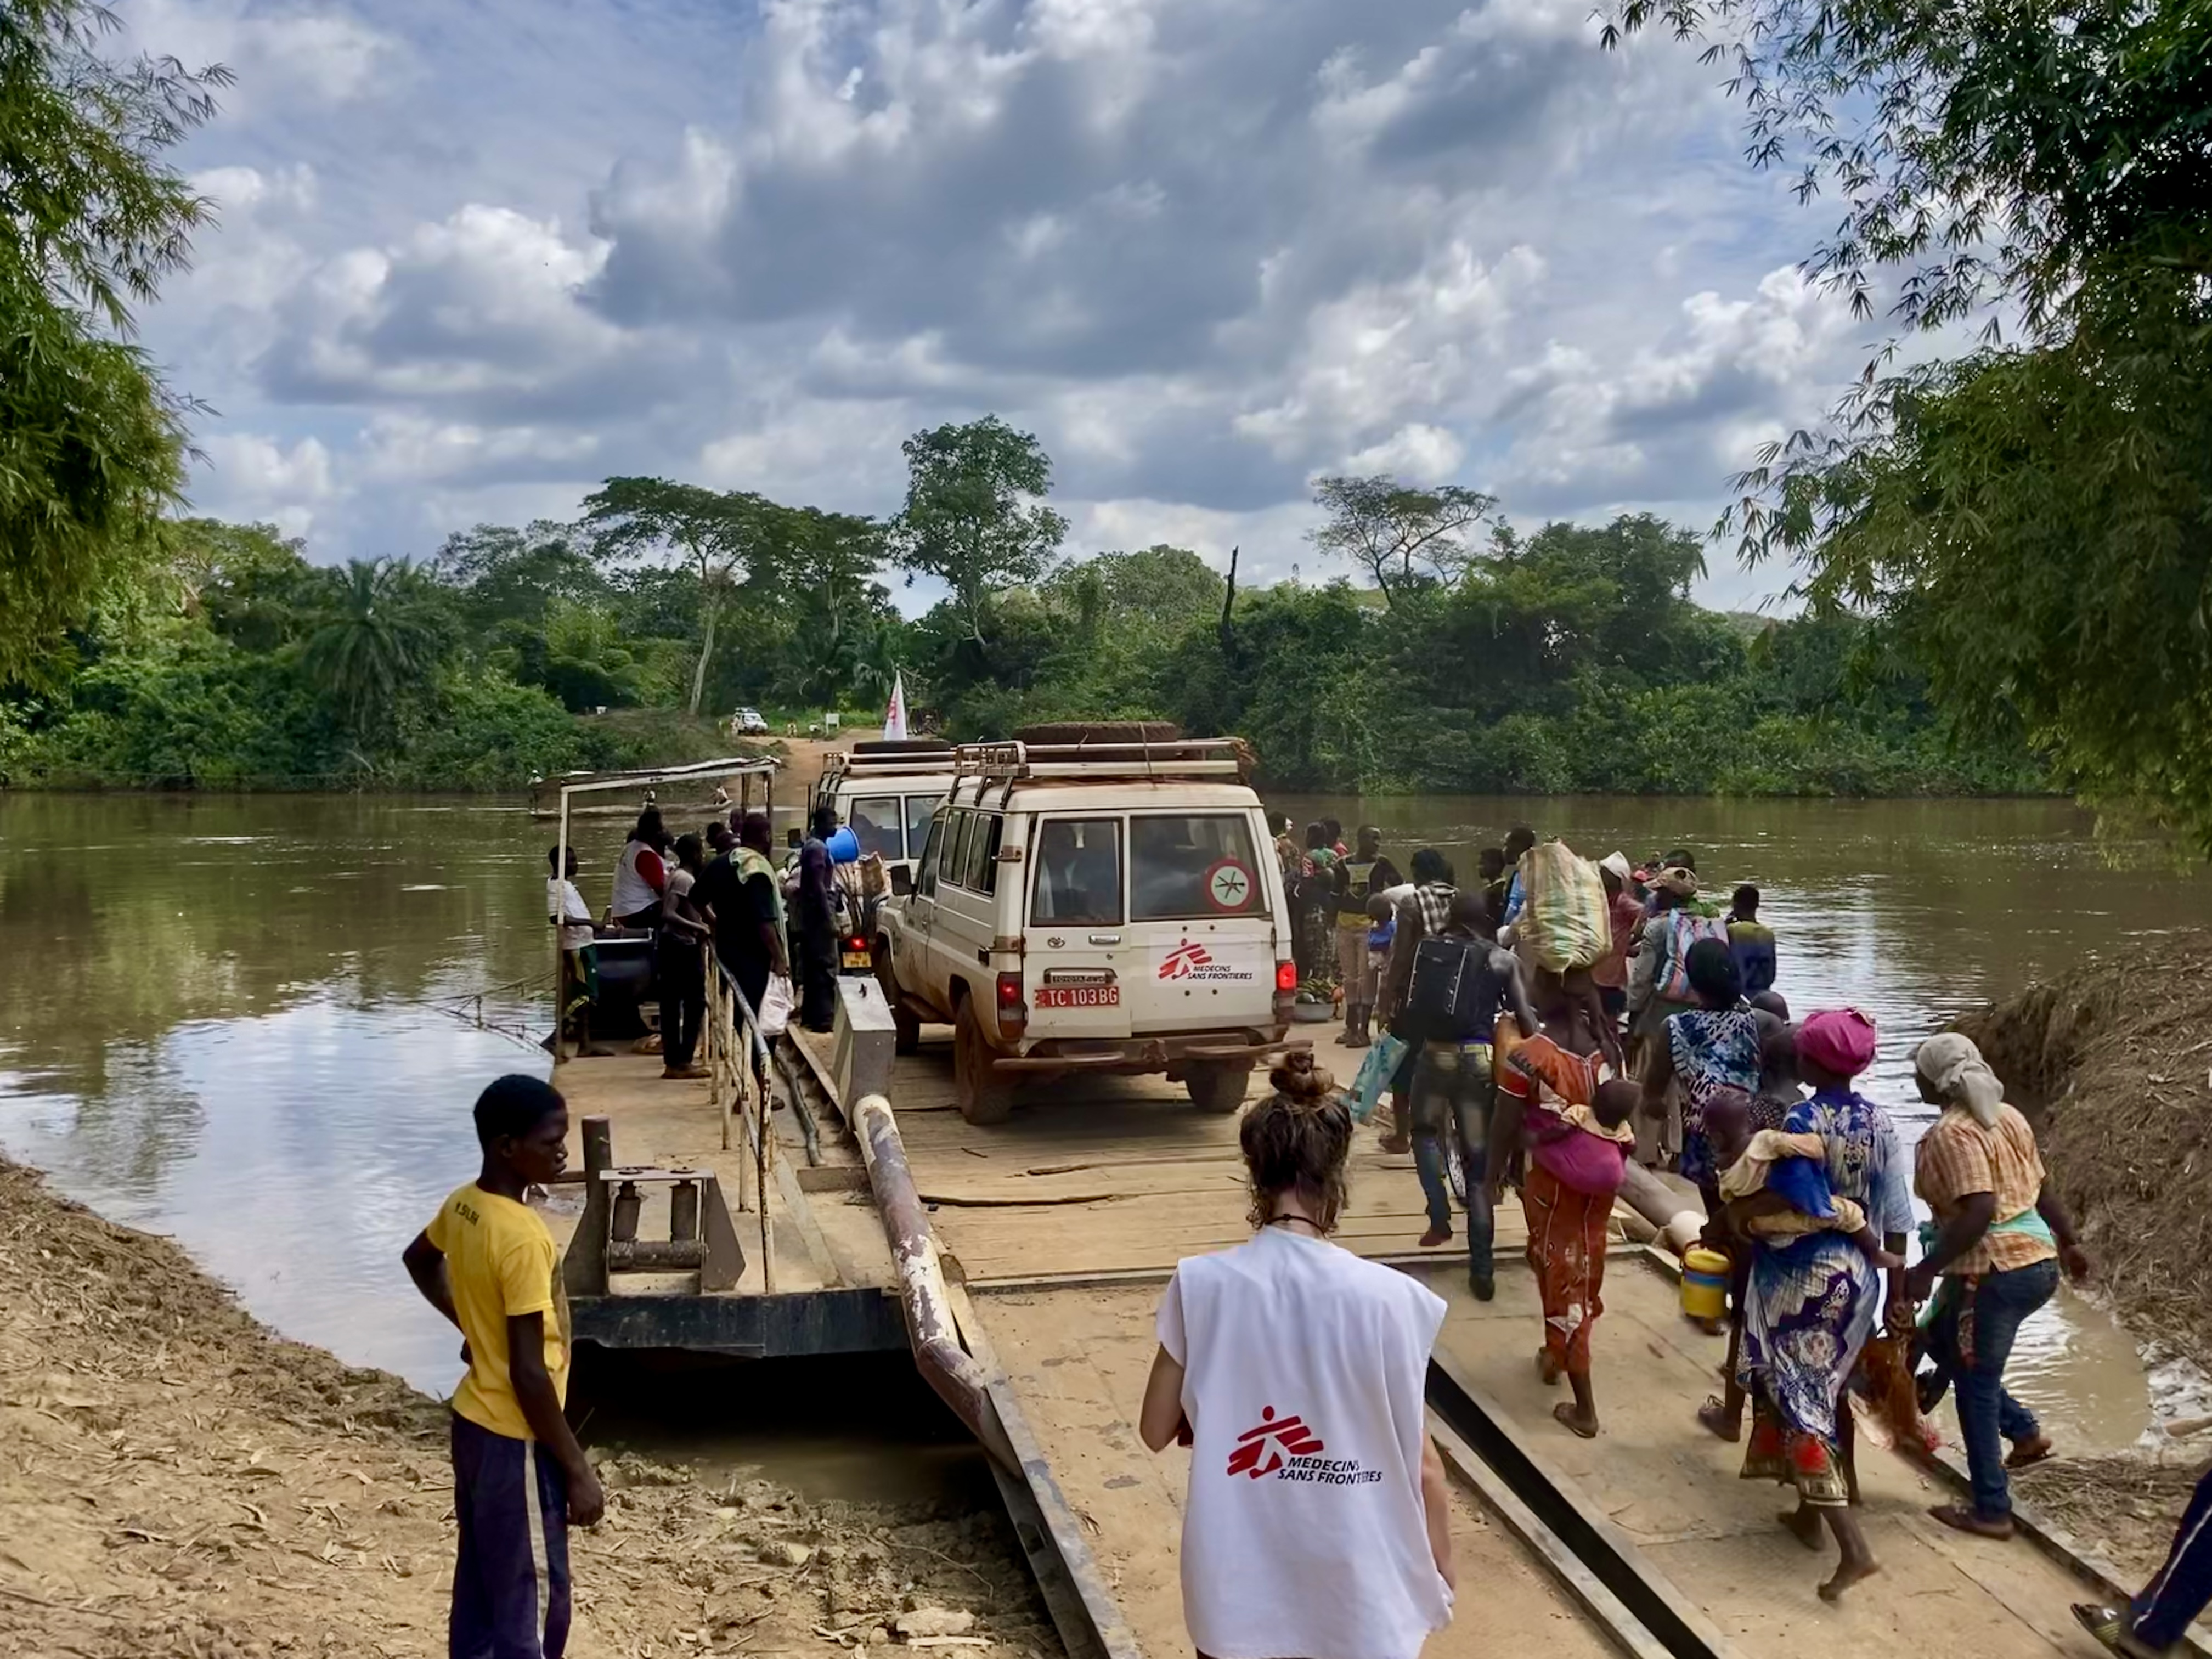 Reaching remote communities in south-east Central African Republic The outreach team crosses the river on a floating platform known locally as a “bak”. It is market day, and the MSF team is crossing alongside many traders who walked for hours to get there, mostly in very harsh conditions. The team is on a trip to support local health centres.